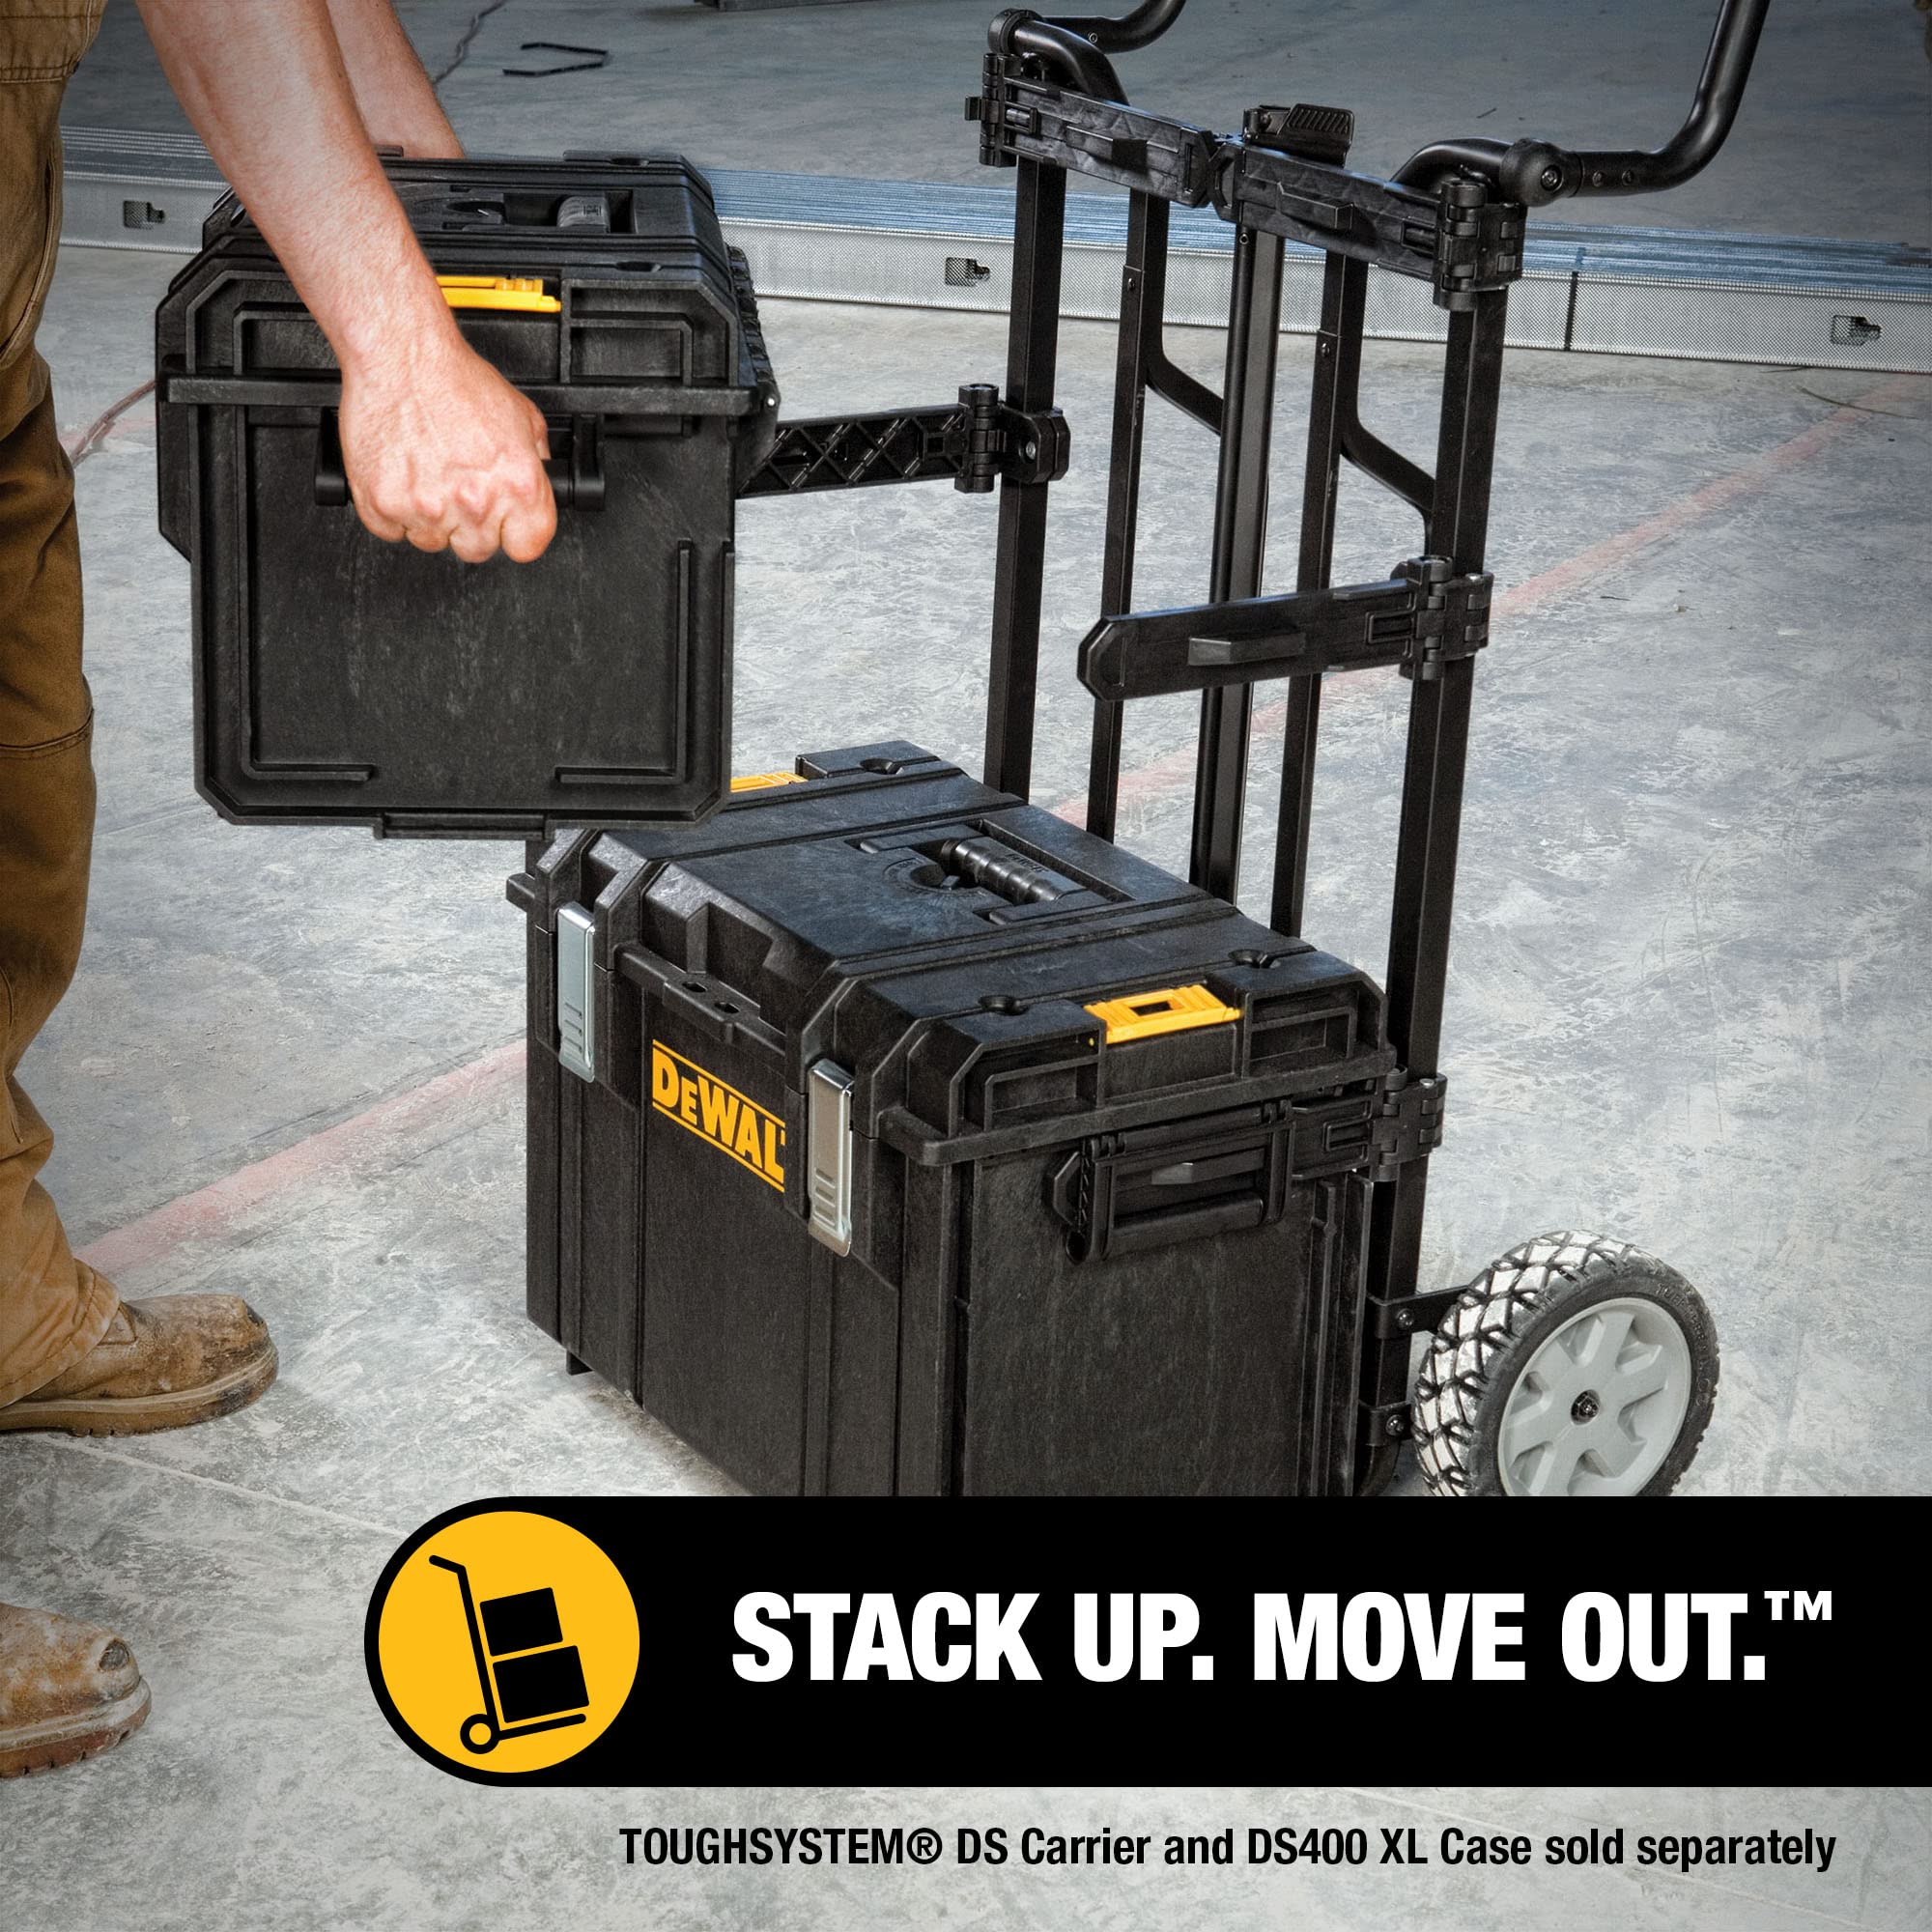 How to Organize Your Tools With Dewalt’s Tough System: Maximize Your Workshop’s Potential